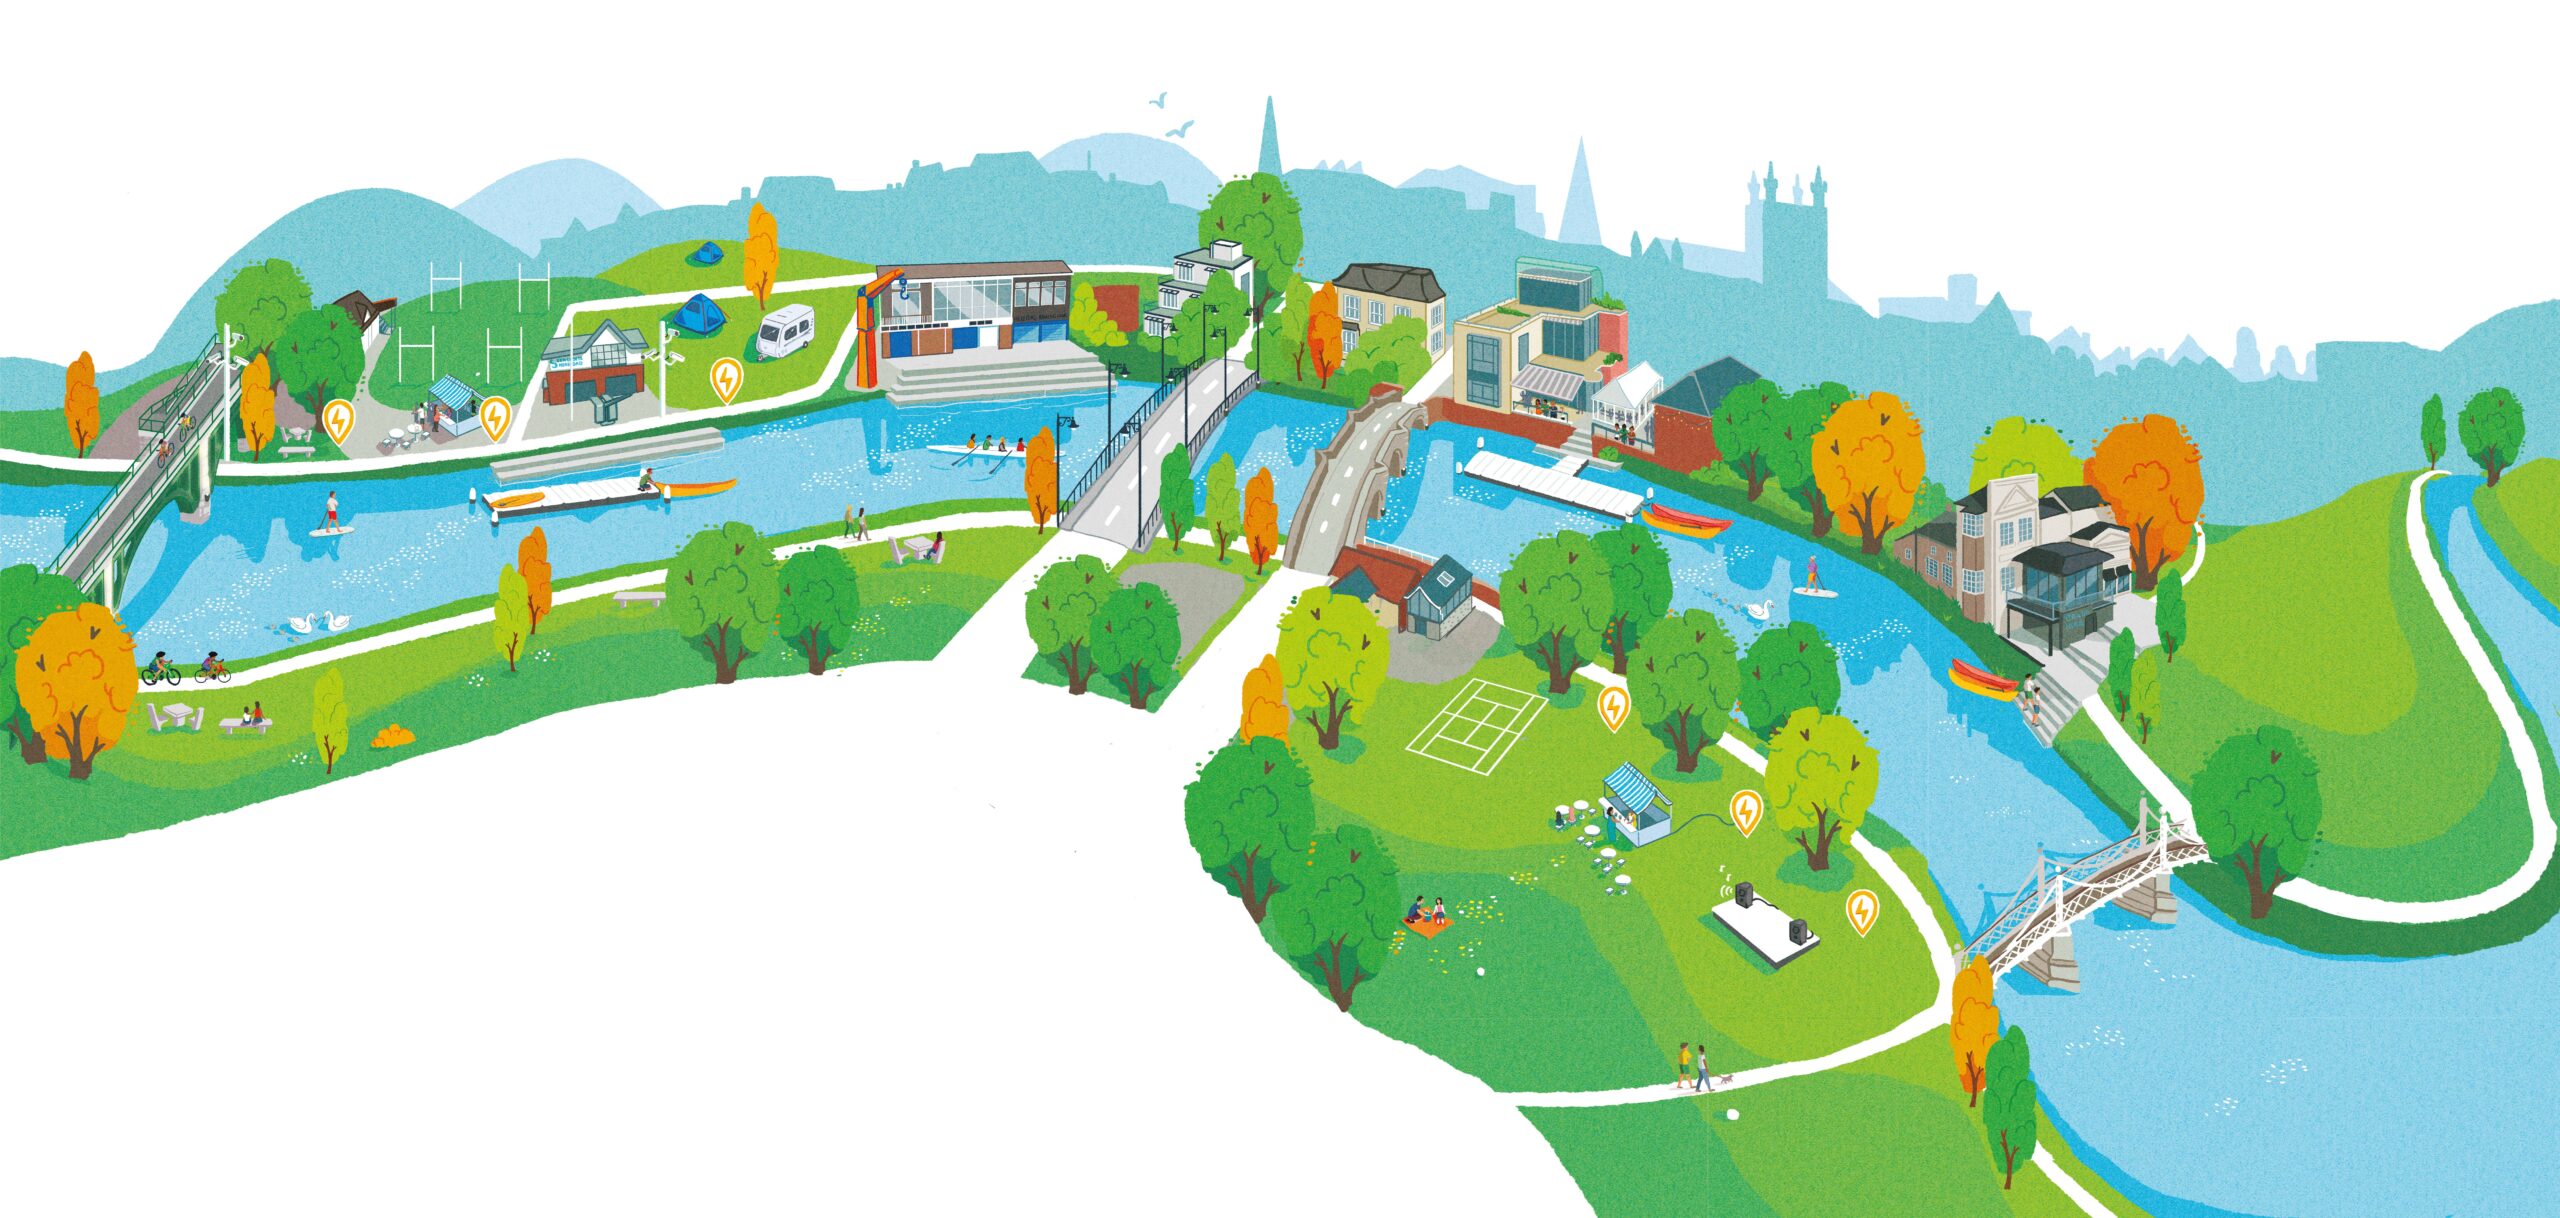 Illustration of the River Wye projects for #StrongerHereford